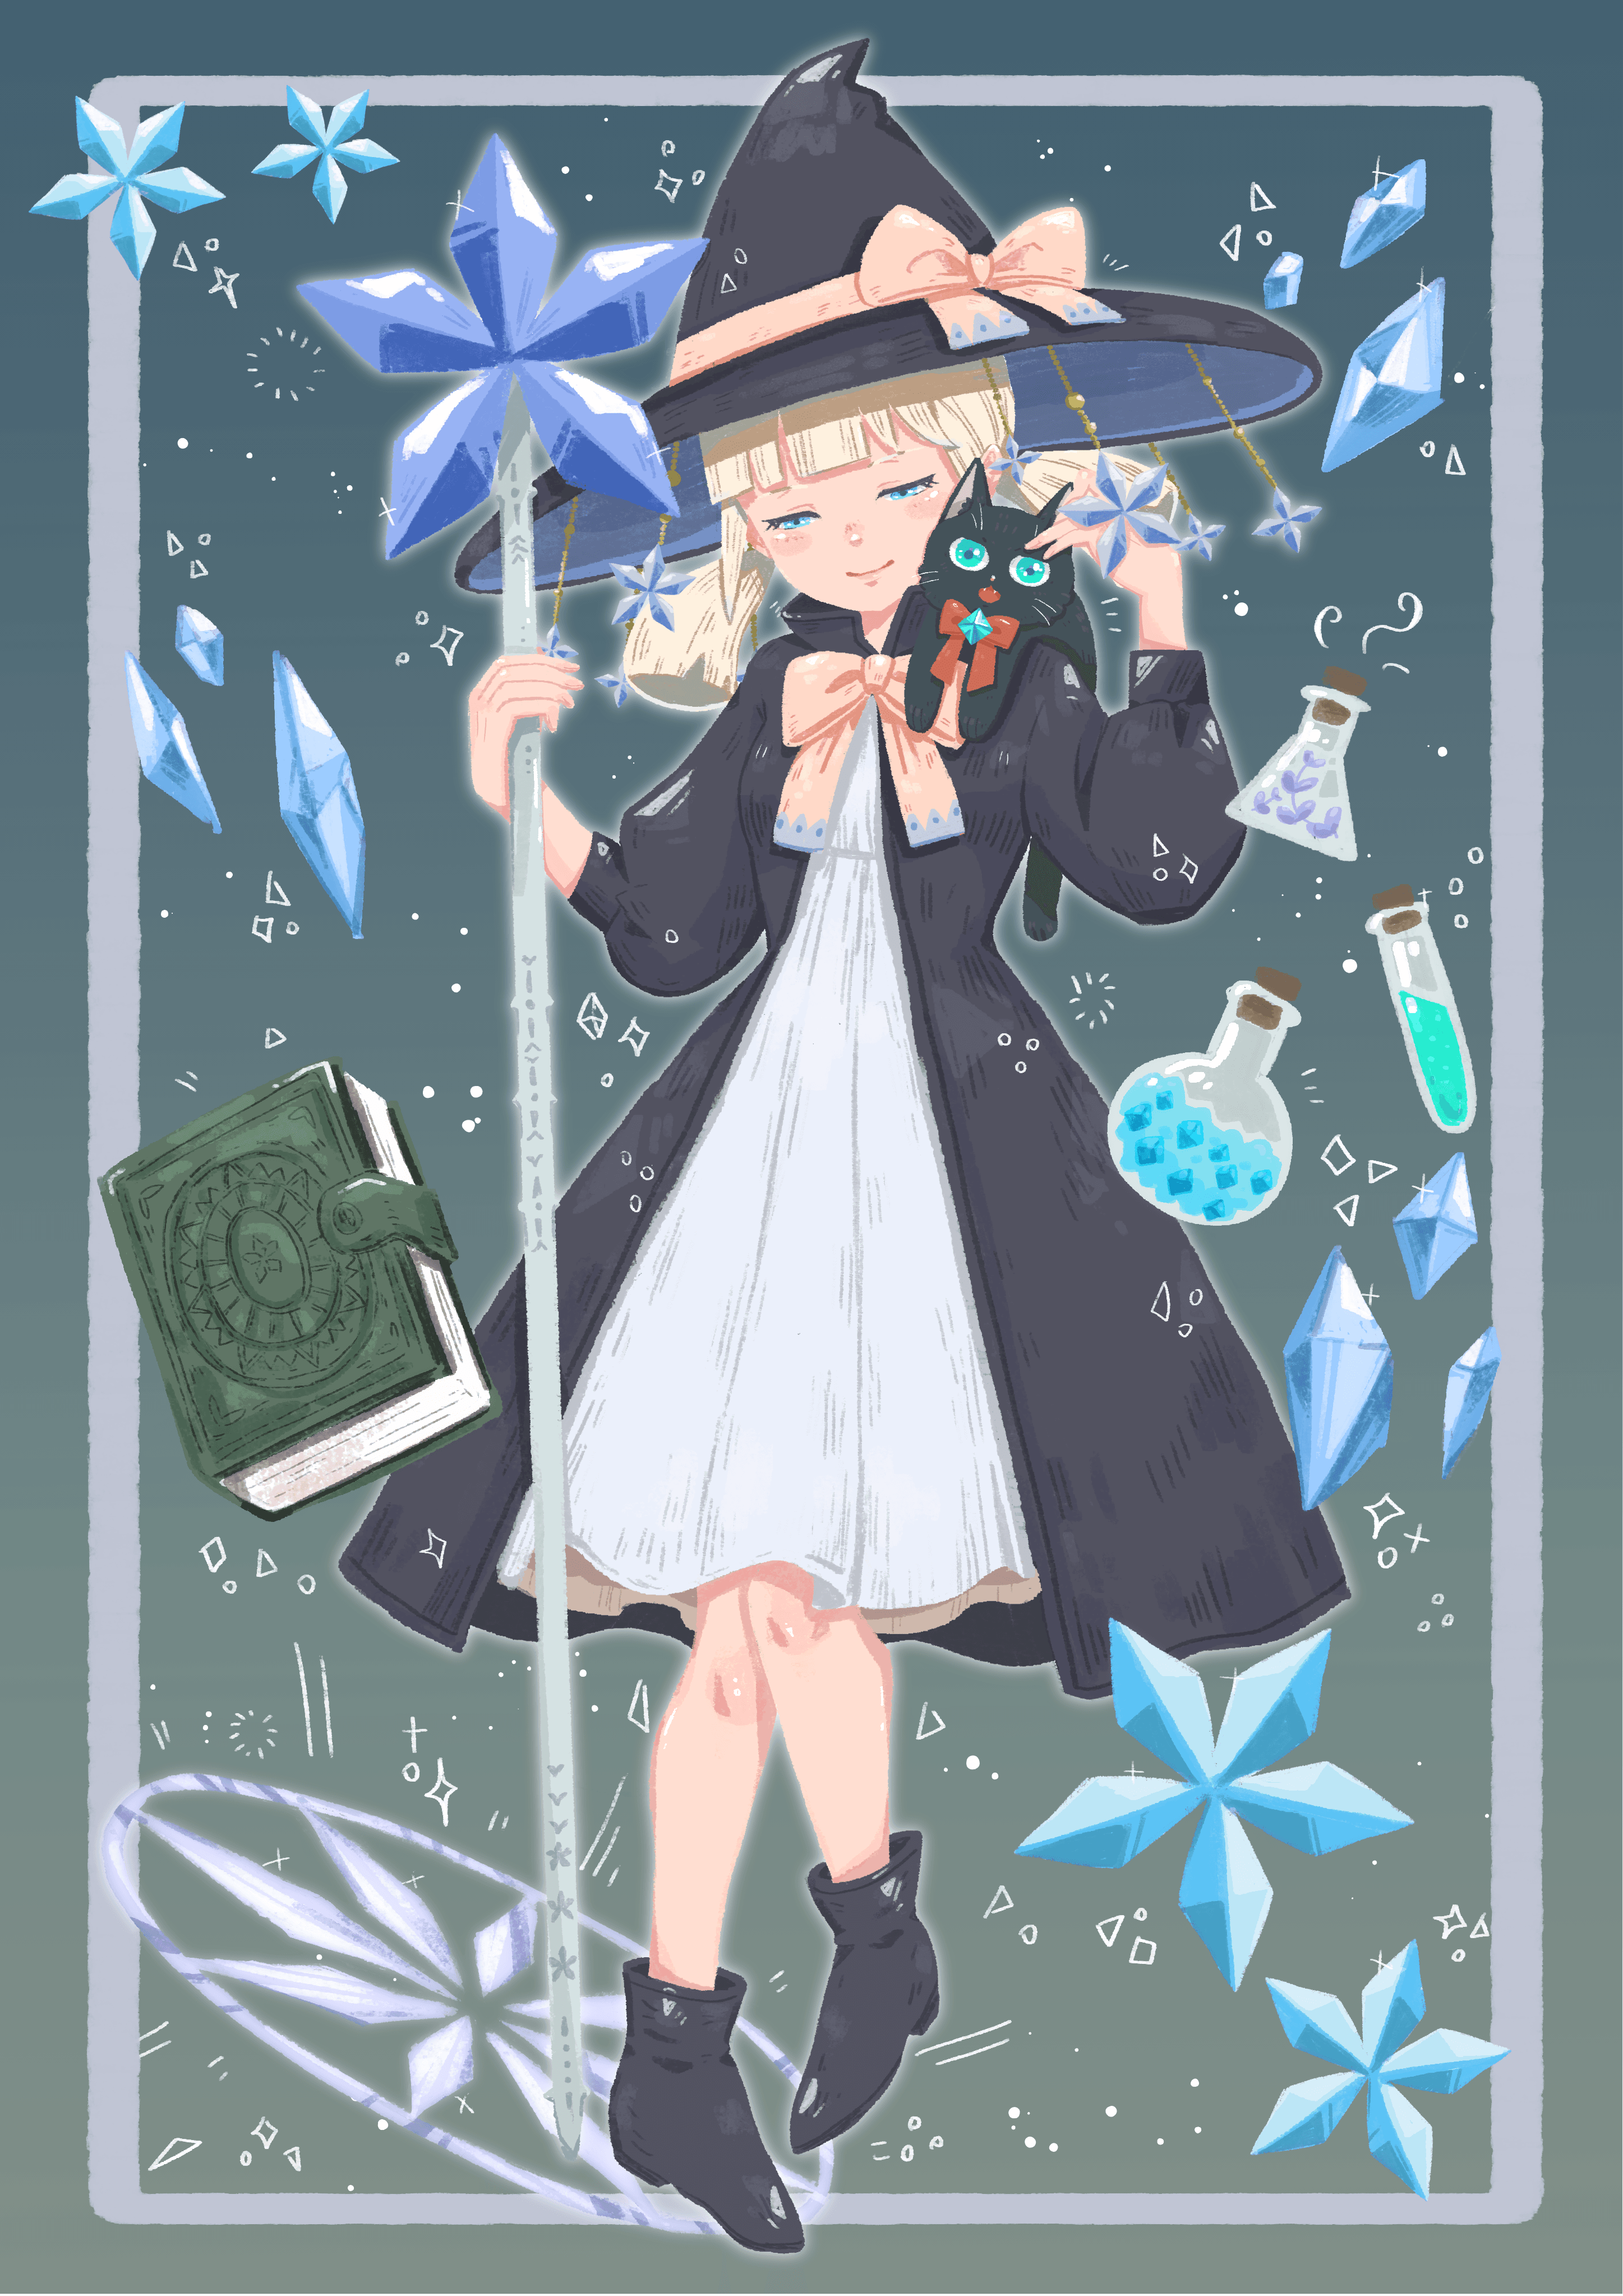 #003 Wizard of the Ice Flower. after season